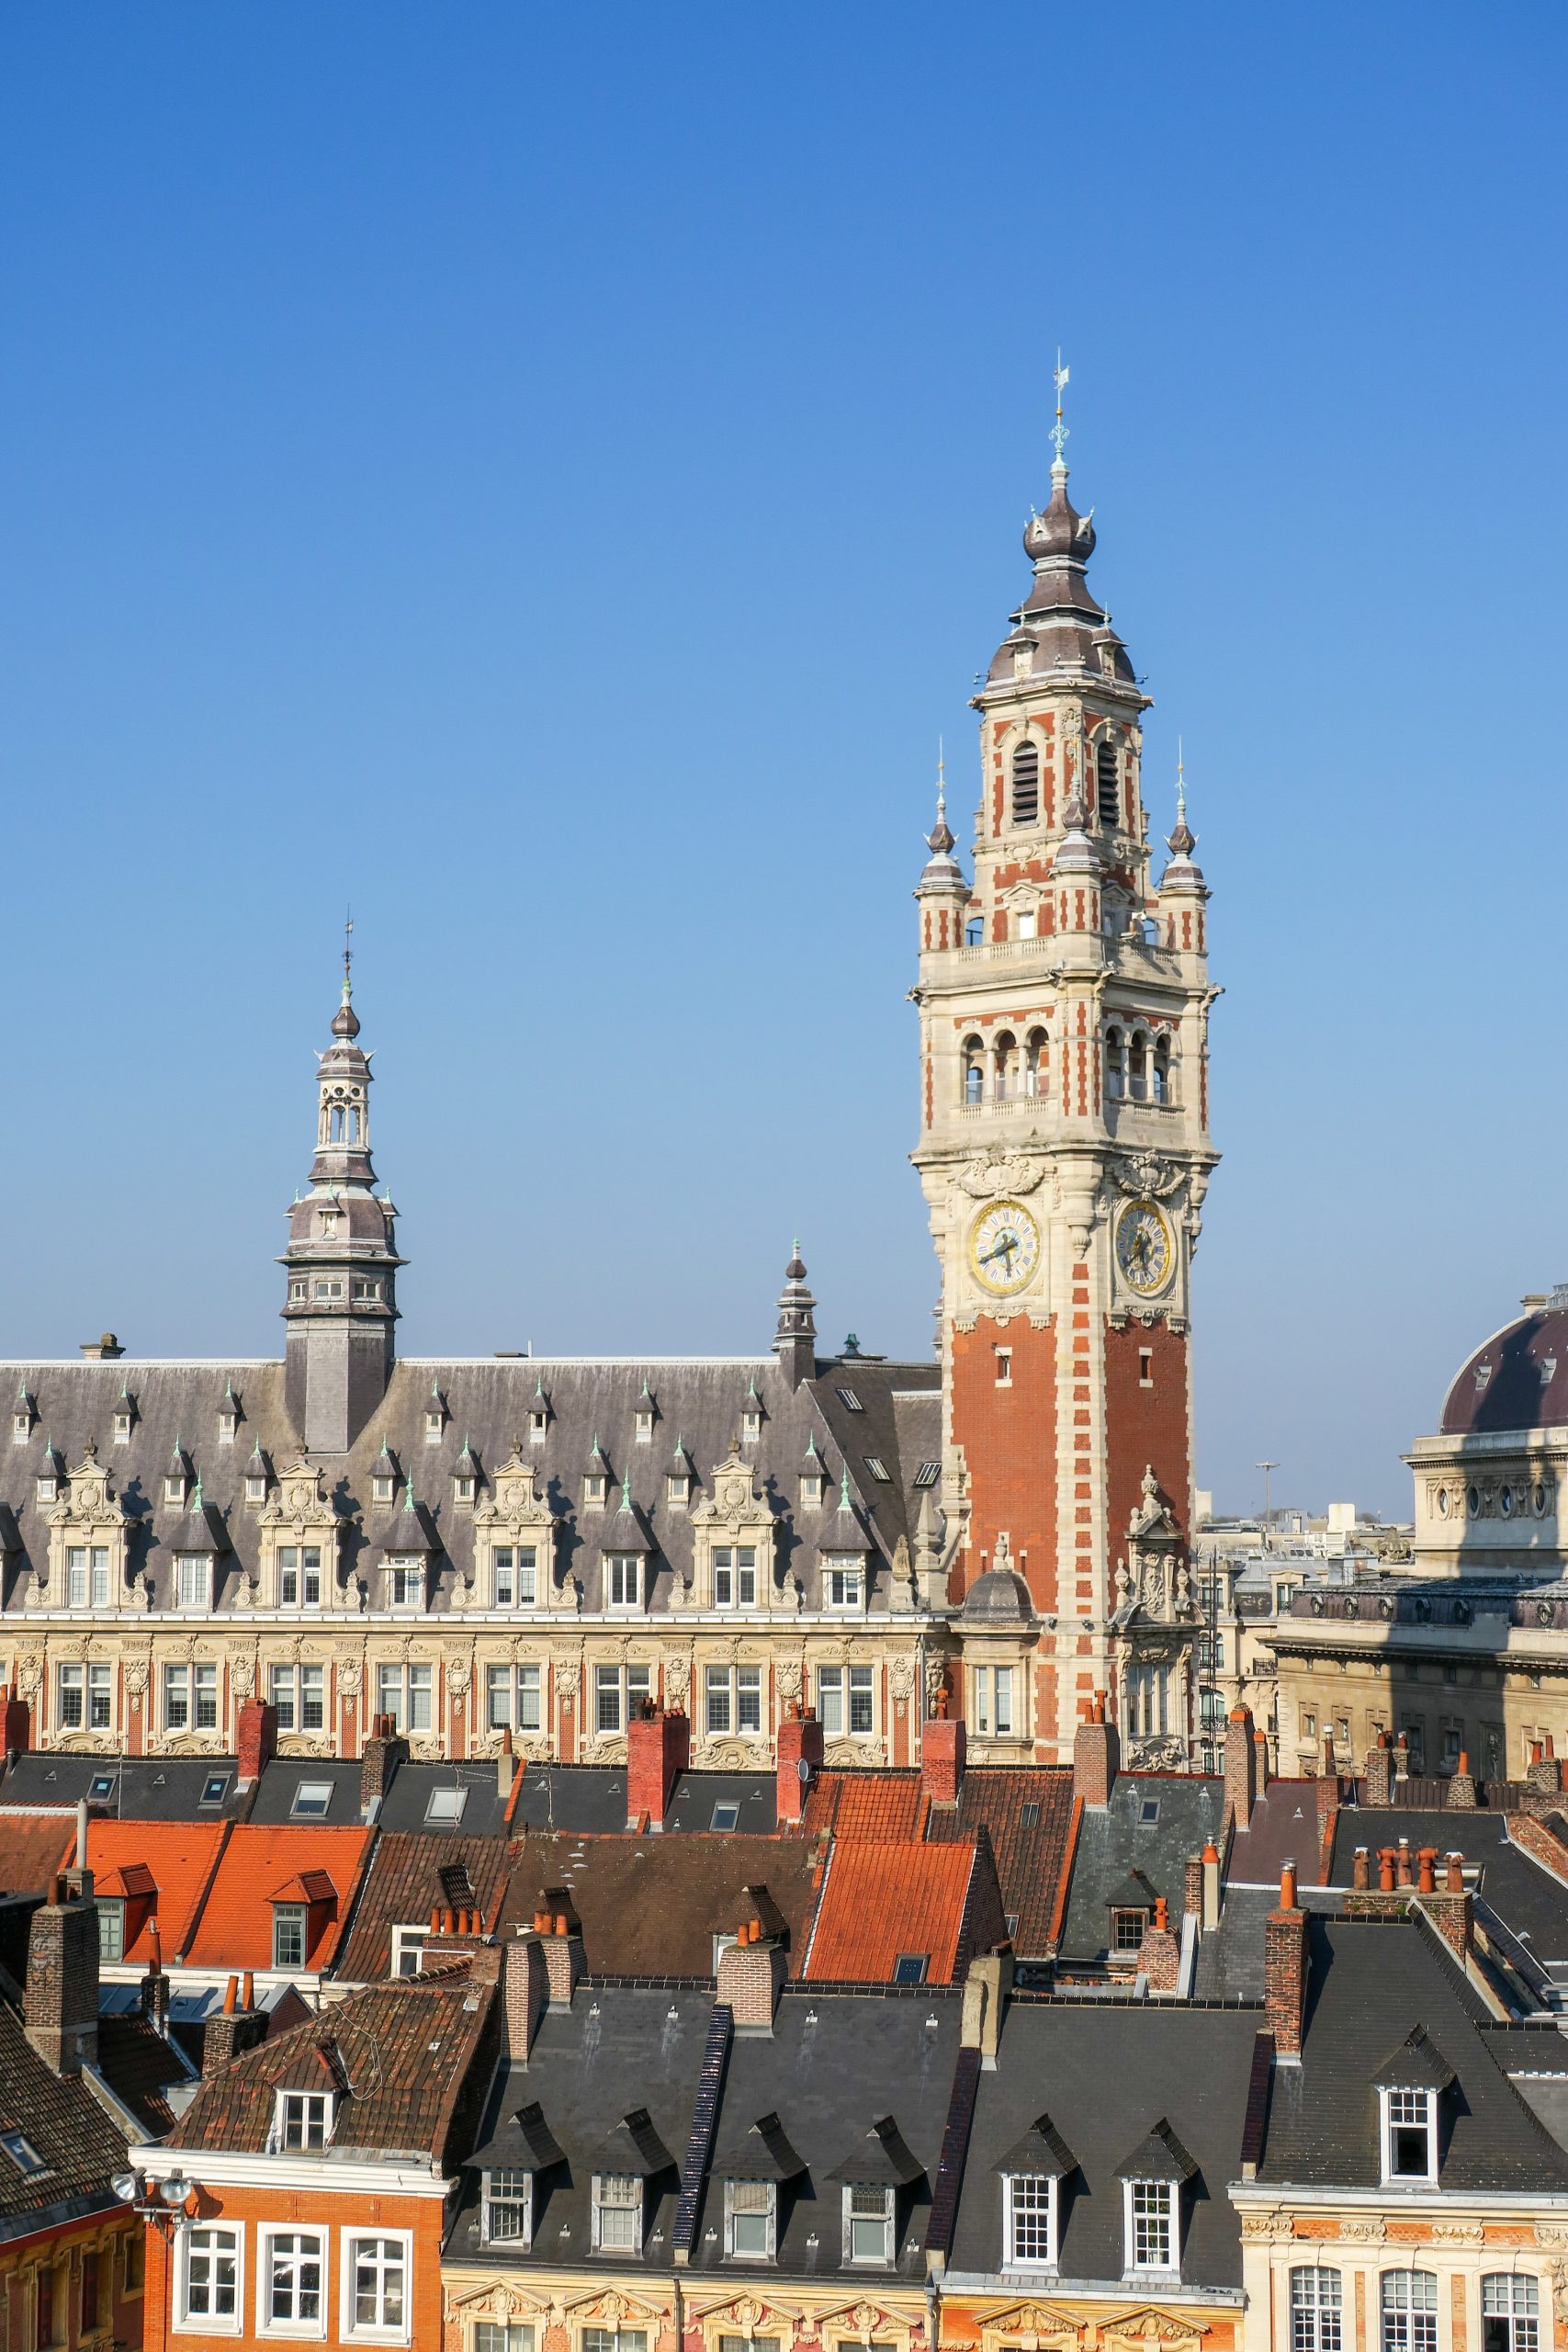 View of the Belfry of the city, from the rooftops of Lille